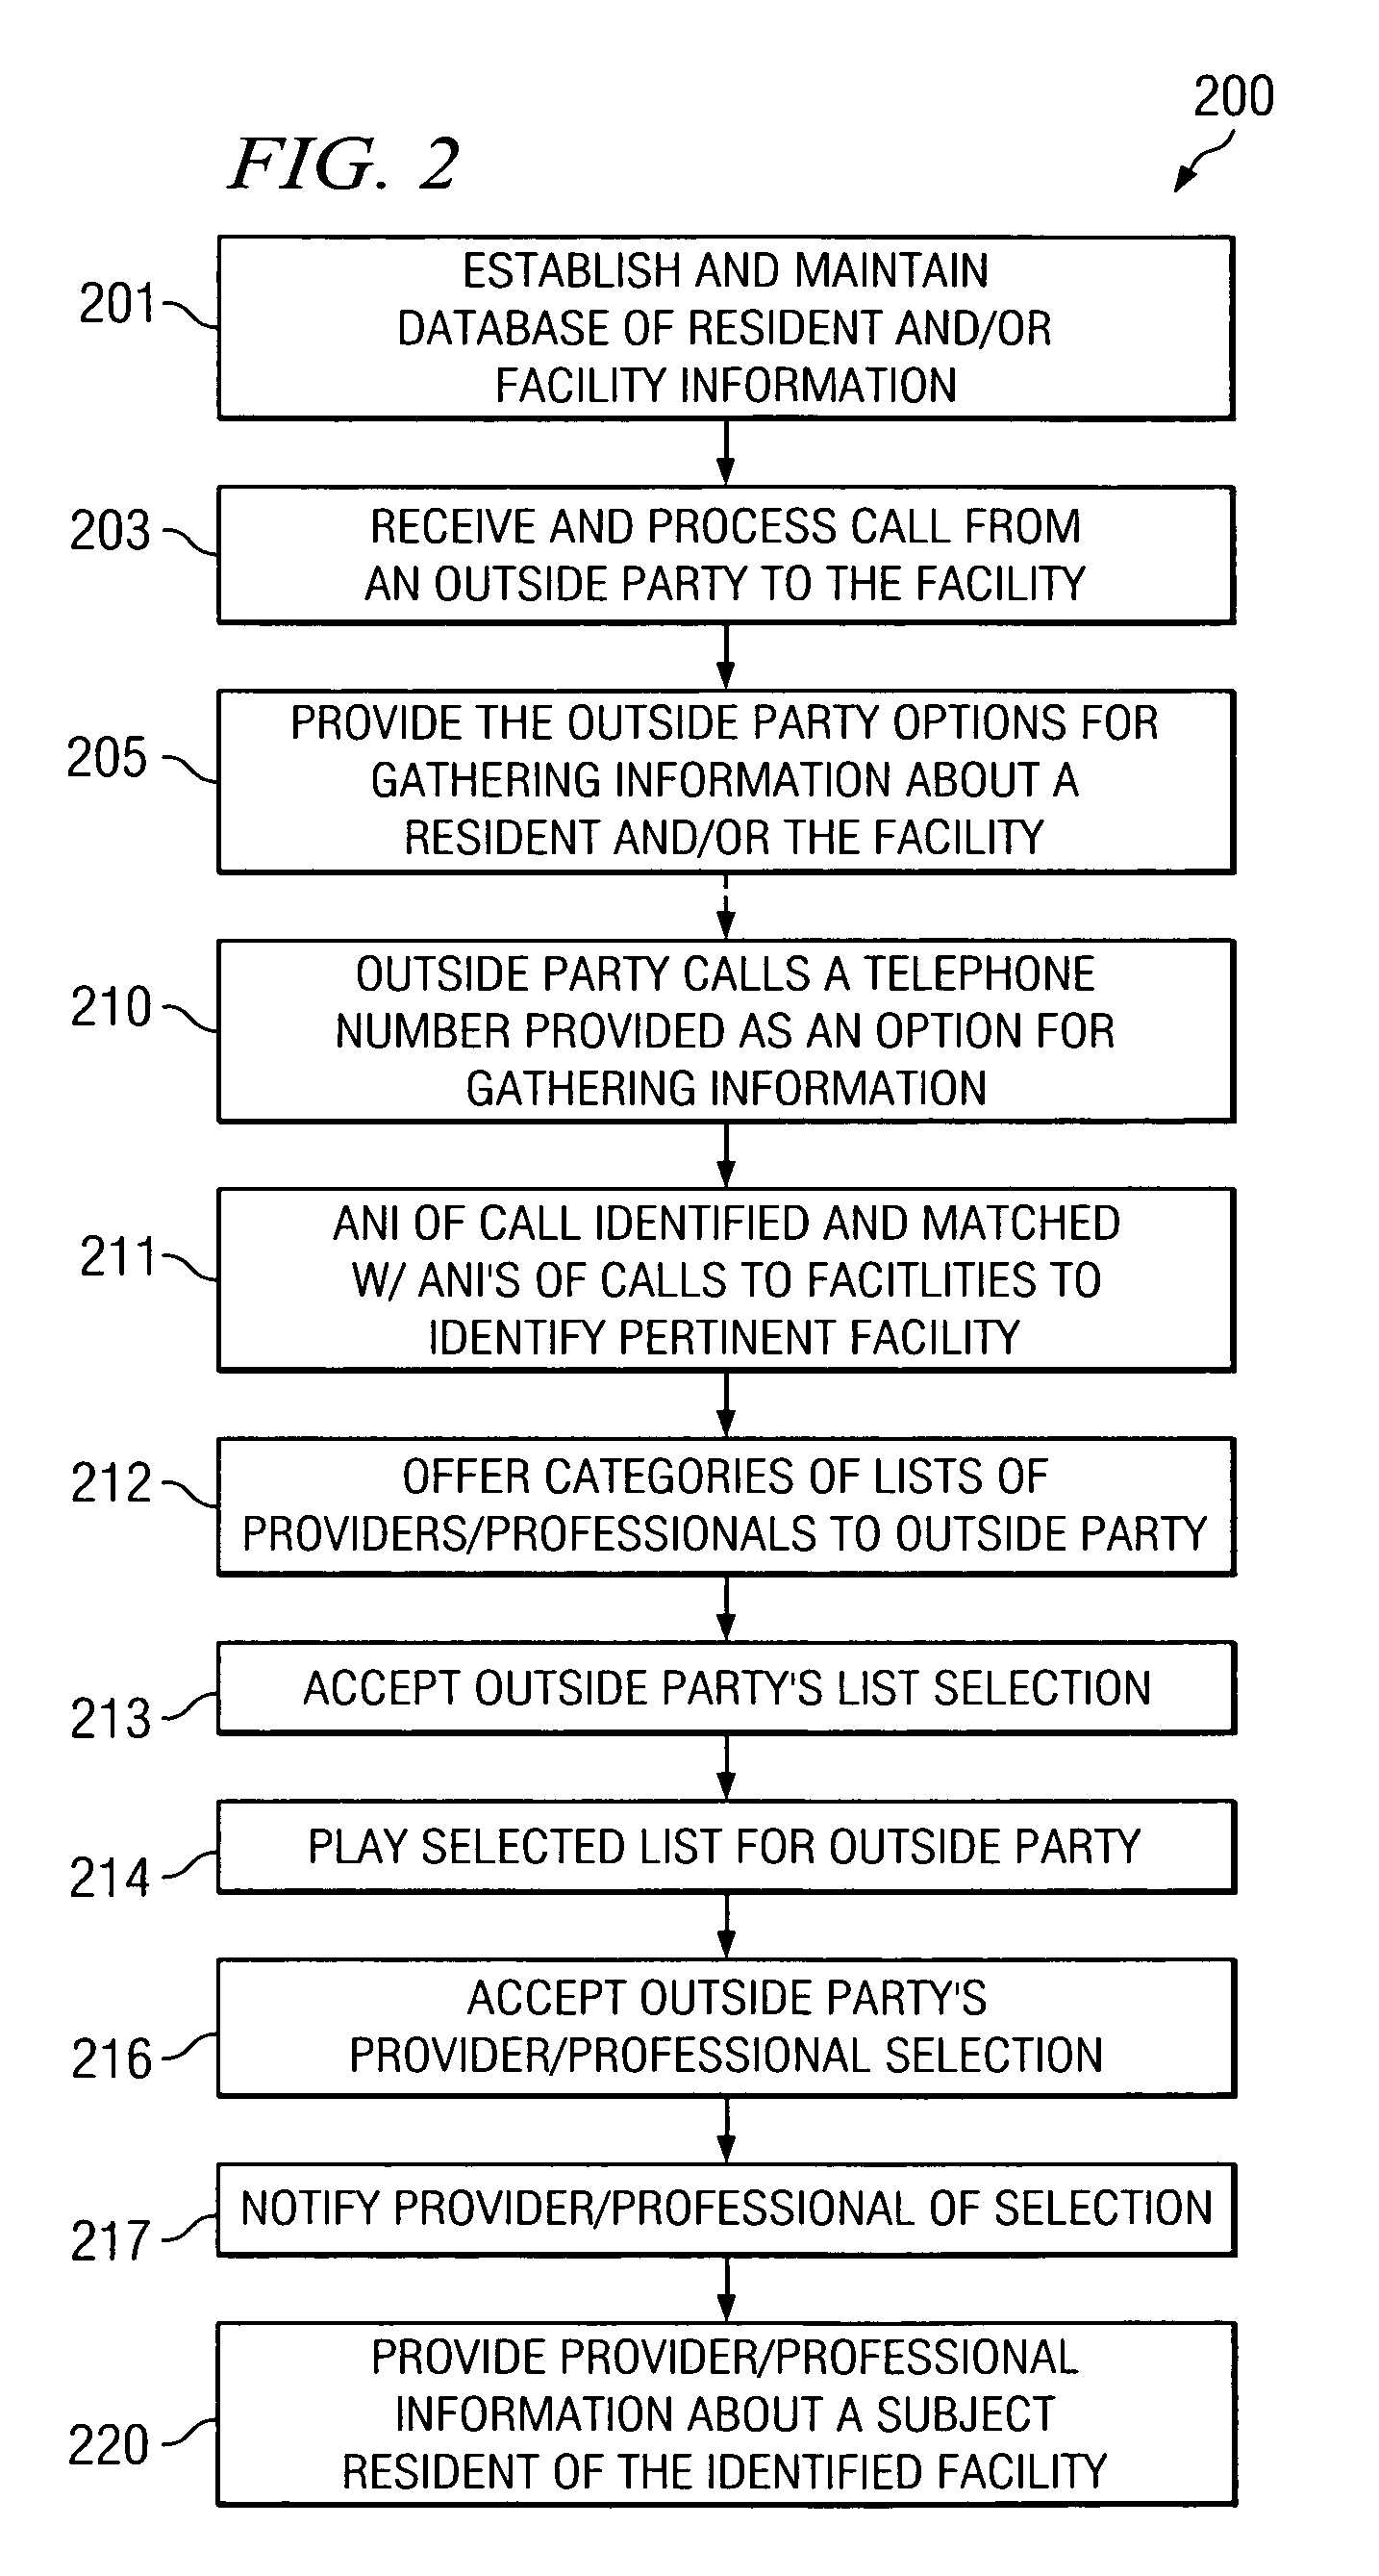 Systems and methods for management and dissemination of information from a controlled environment facility